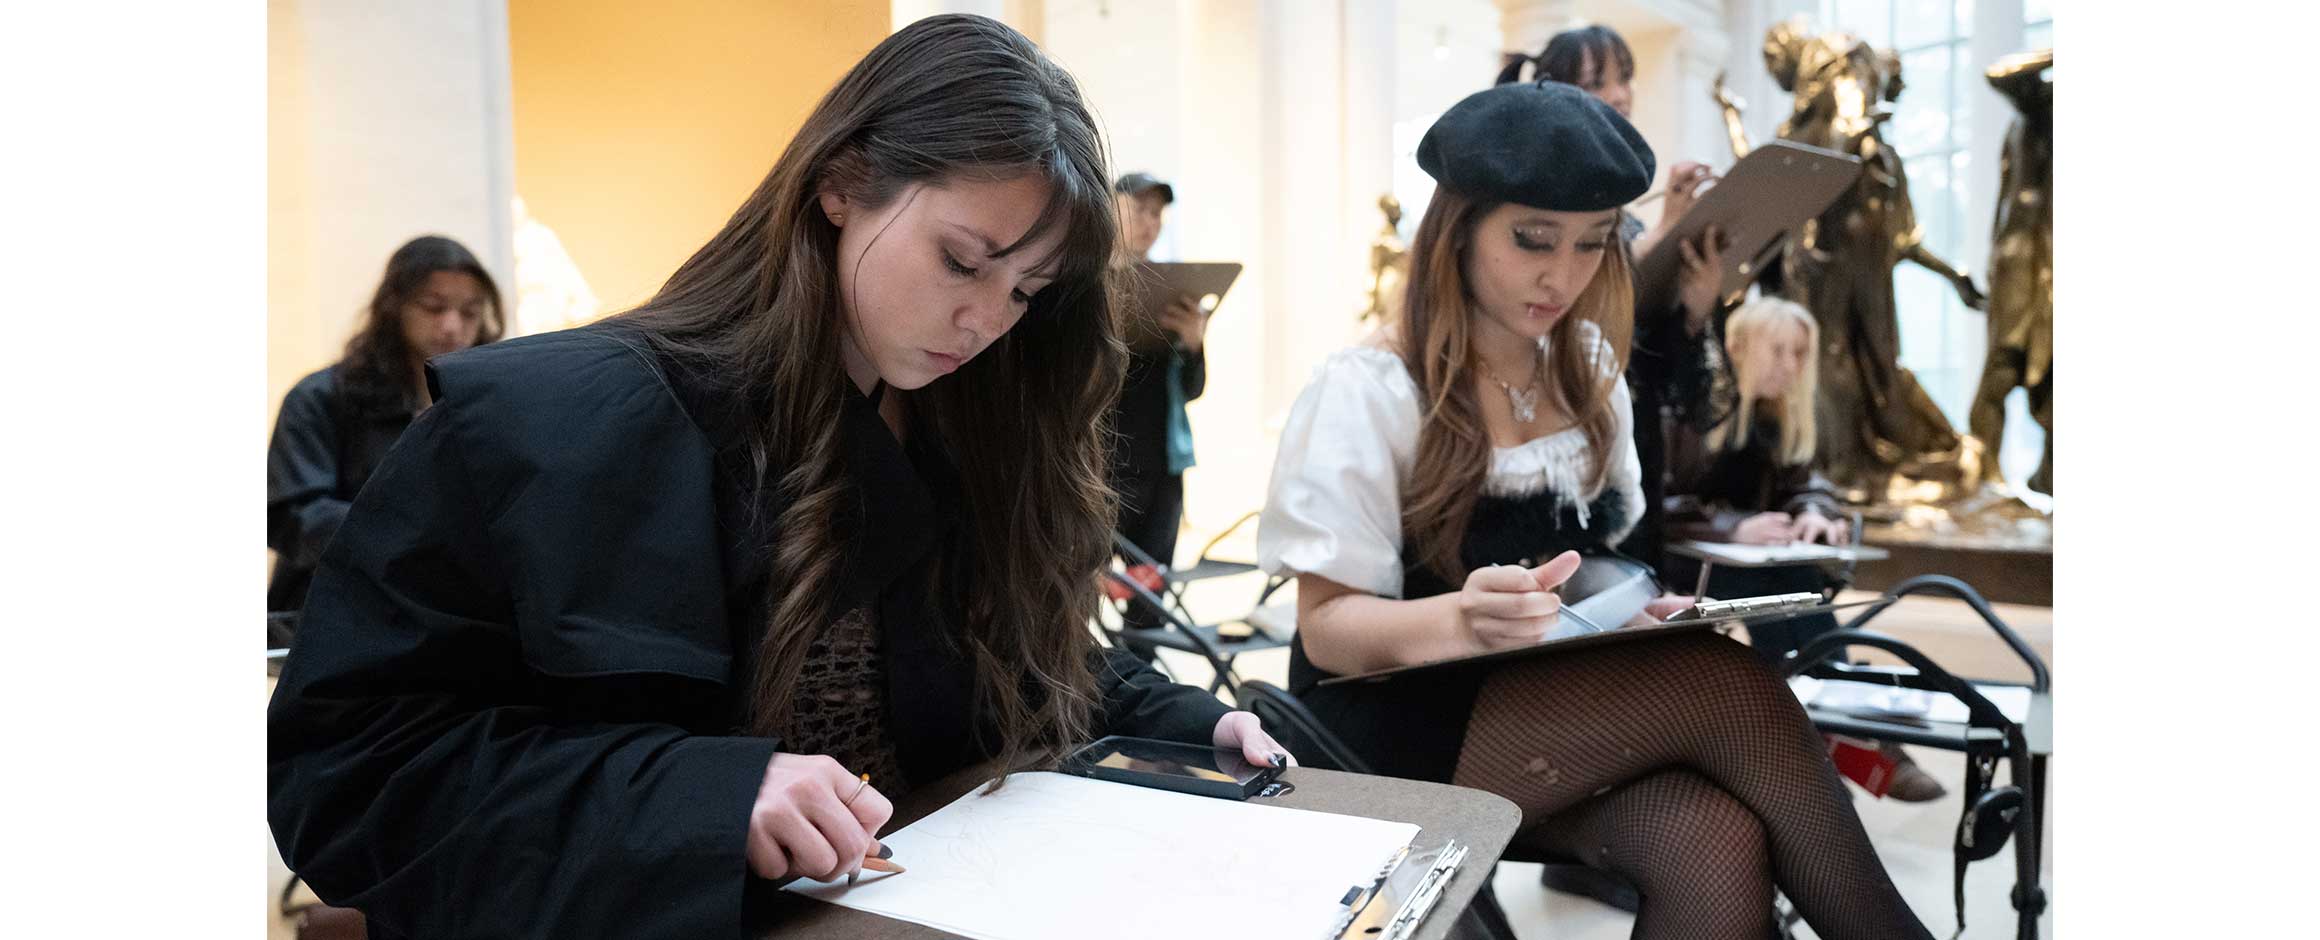 Two young women are sitting in a gallery and drawing.